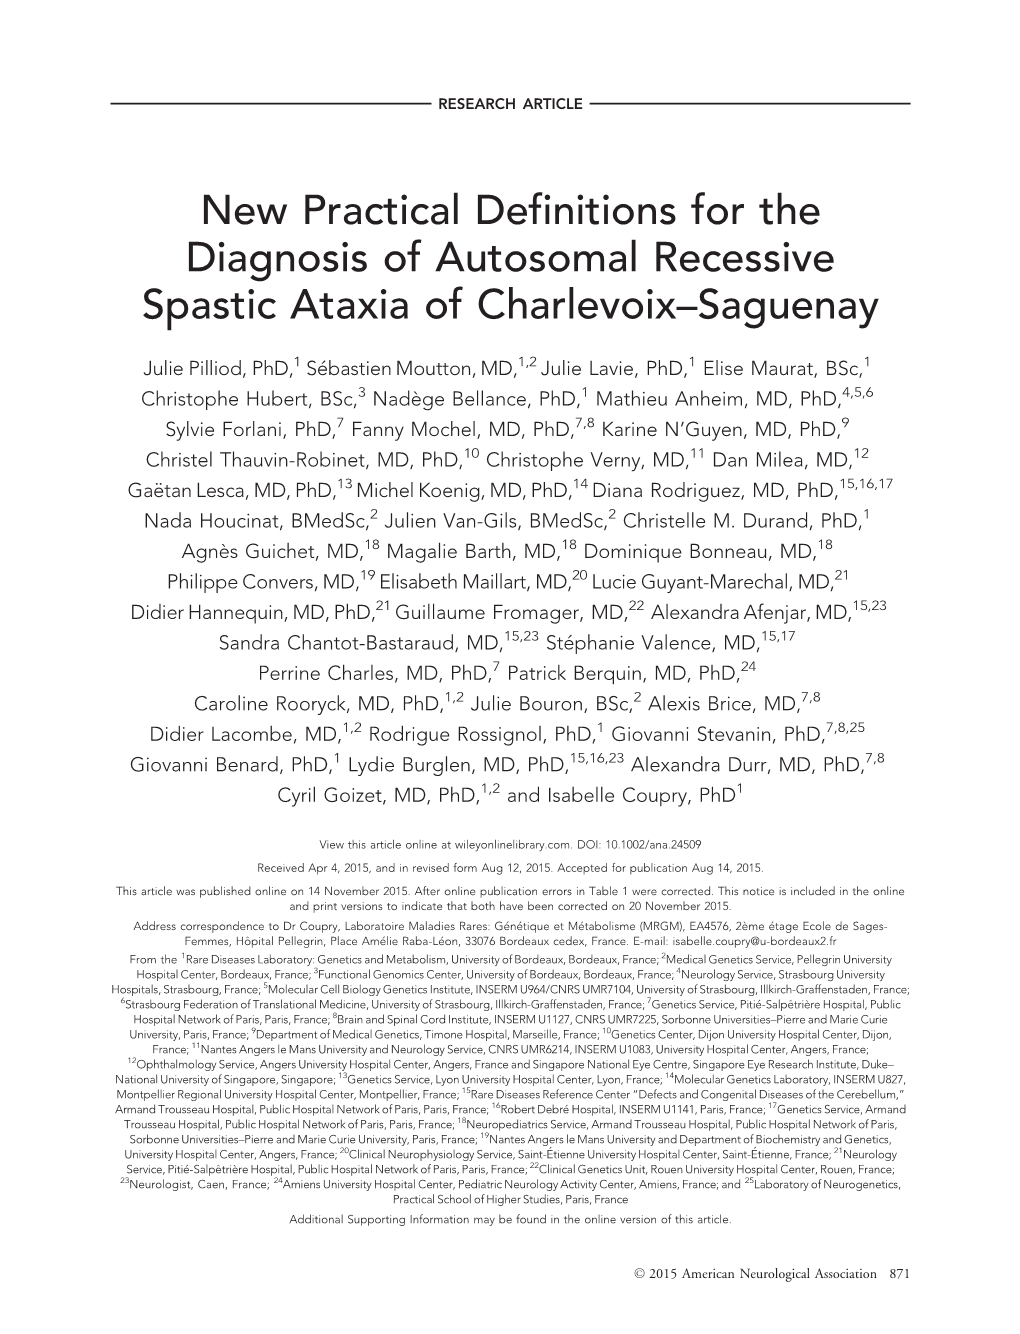 New Practical Definitions for the Diagnosis of Autosomal Recessive Spastic Ataxia of Charlevoix–Saguenay